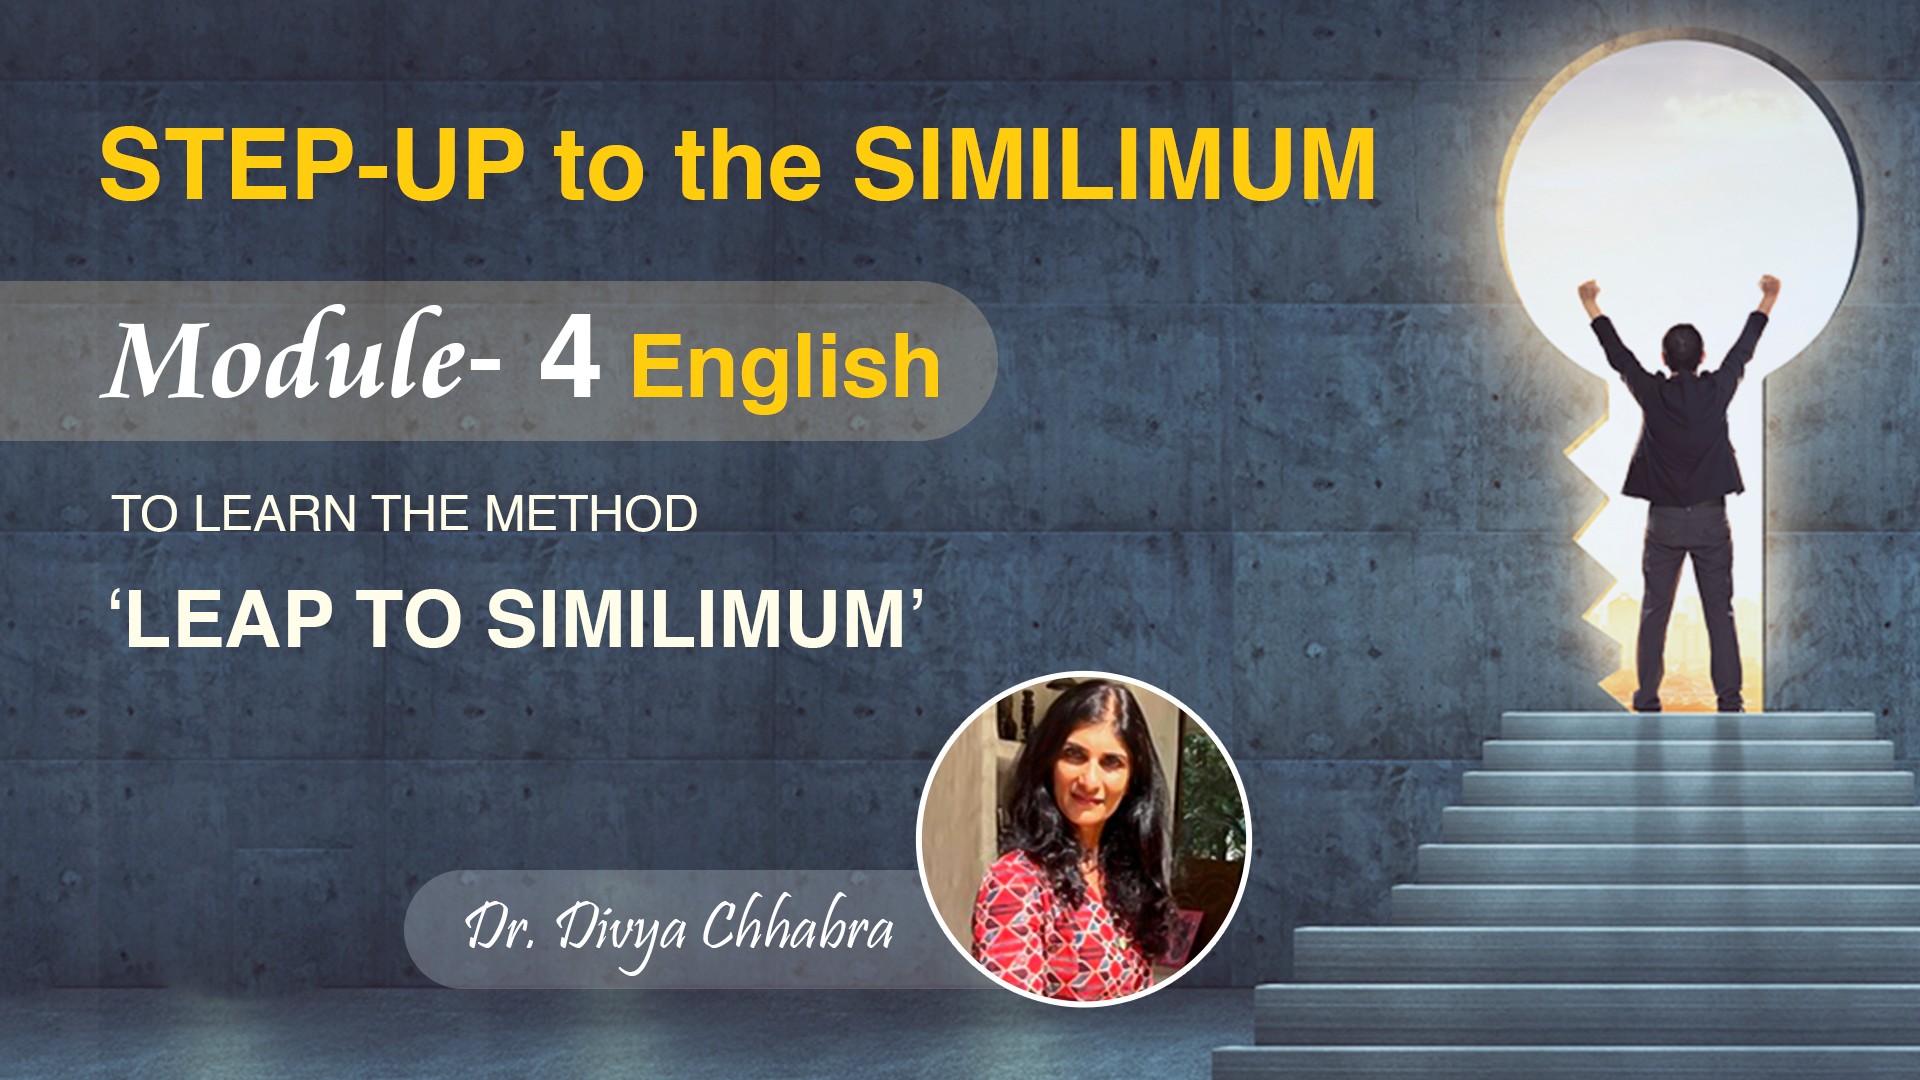 Step-Up to the Similimum - Module 04 - English